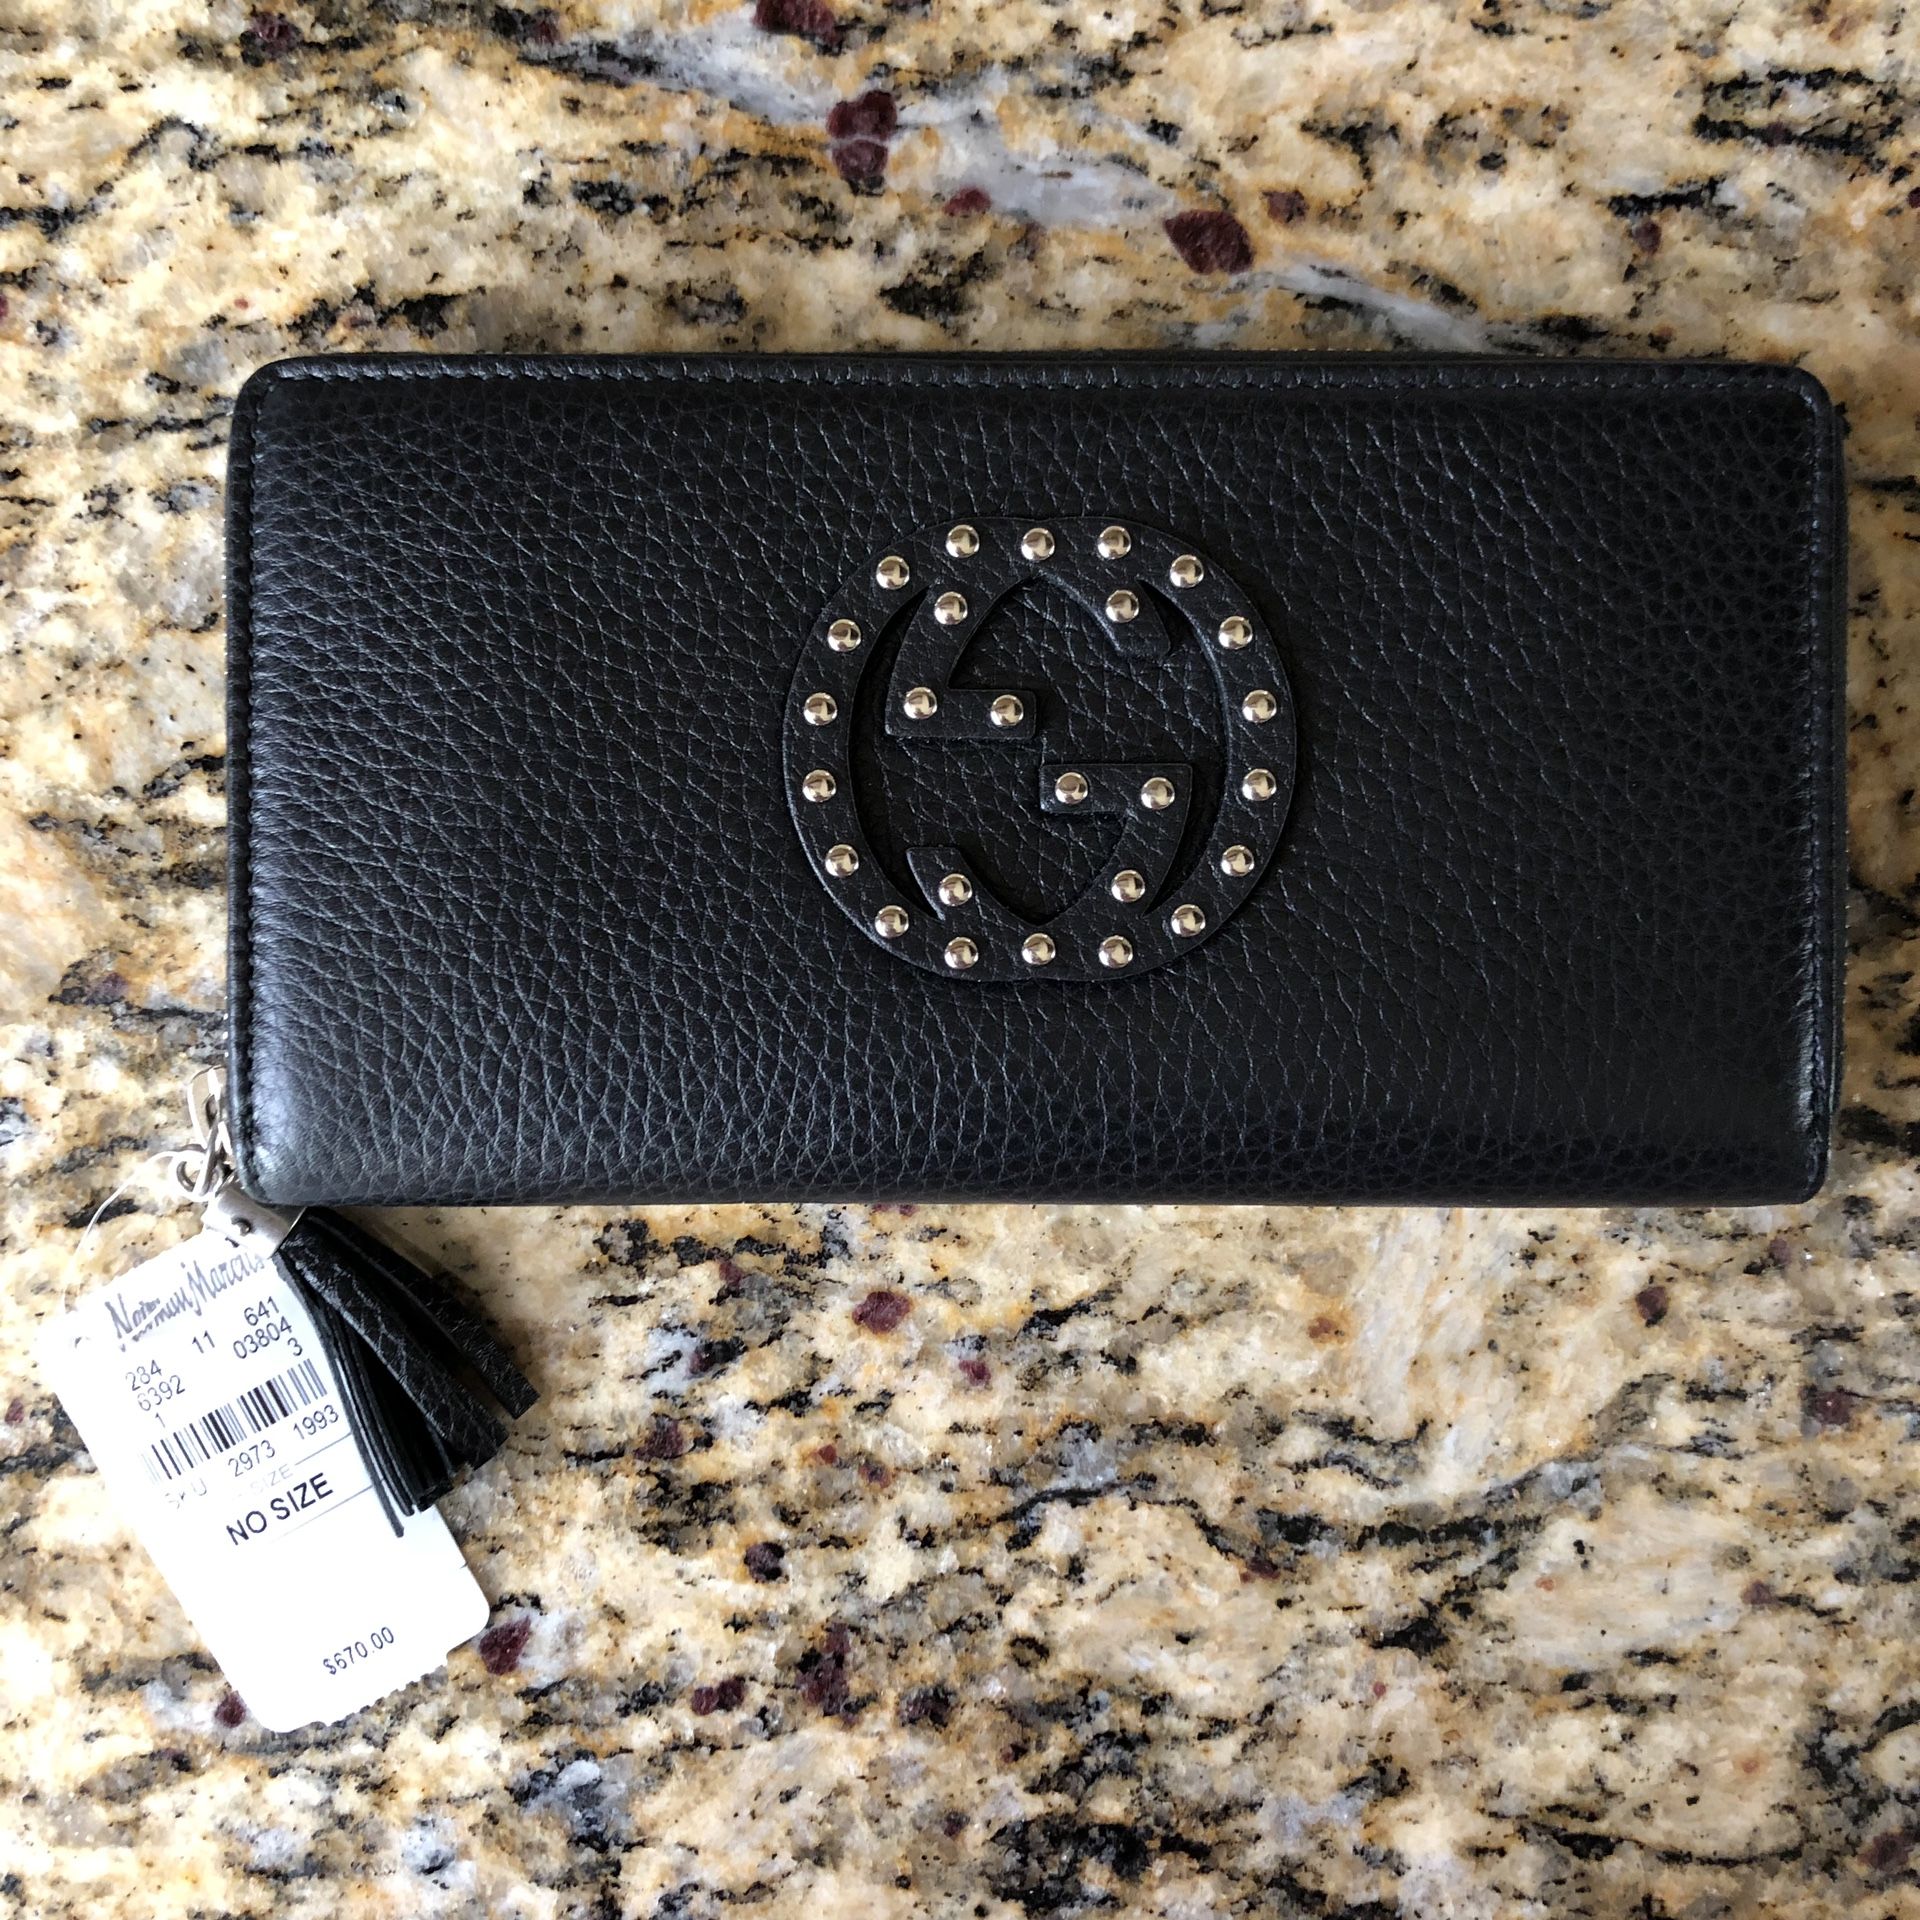 GUCCI Soho Studded Zip Around Leather Wallet - BLACK